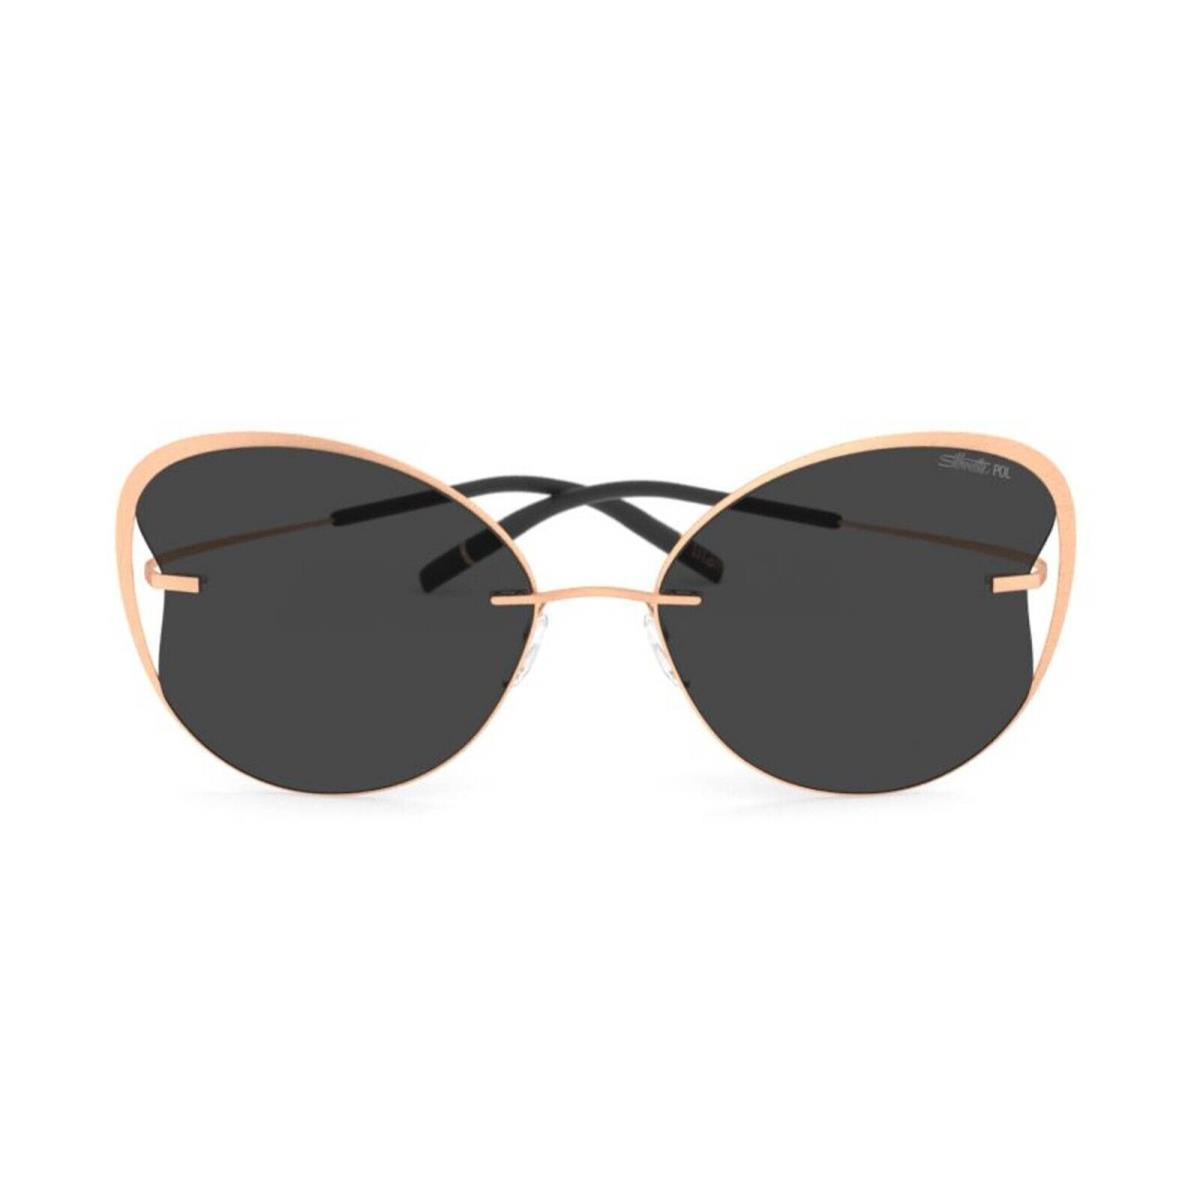 Silhouette Titan Accent Shades 8173 Rose Gold/grey Polarized 3630 Sunglasses - Frame: Rose Gold, Lens: Grey Polarized